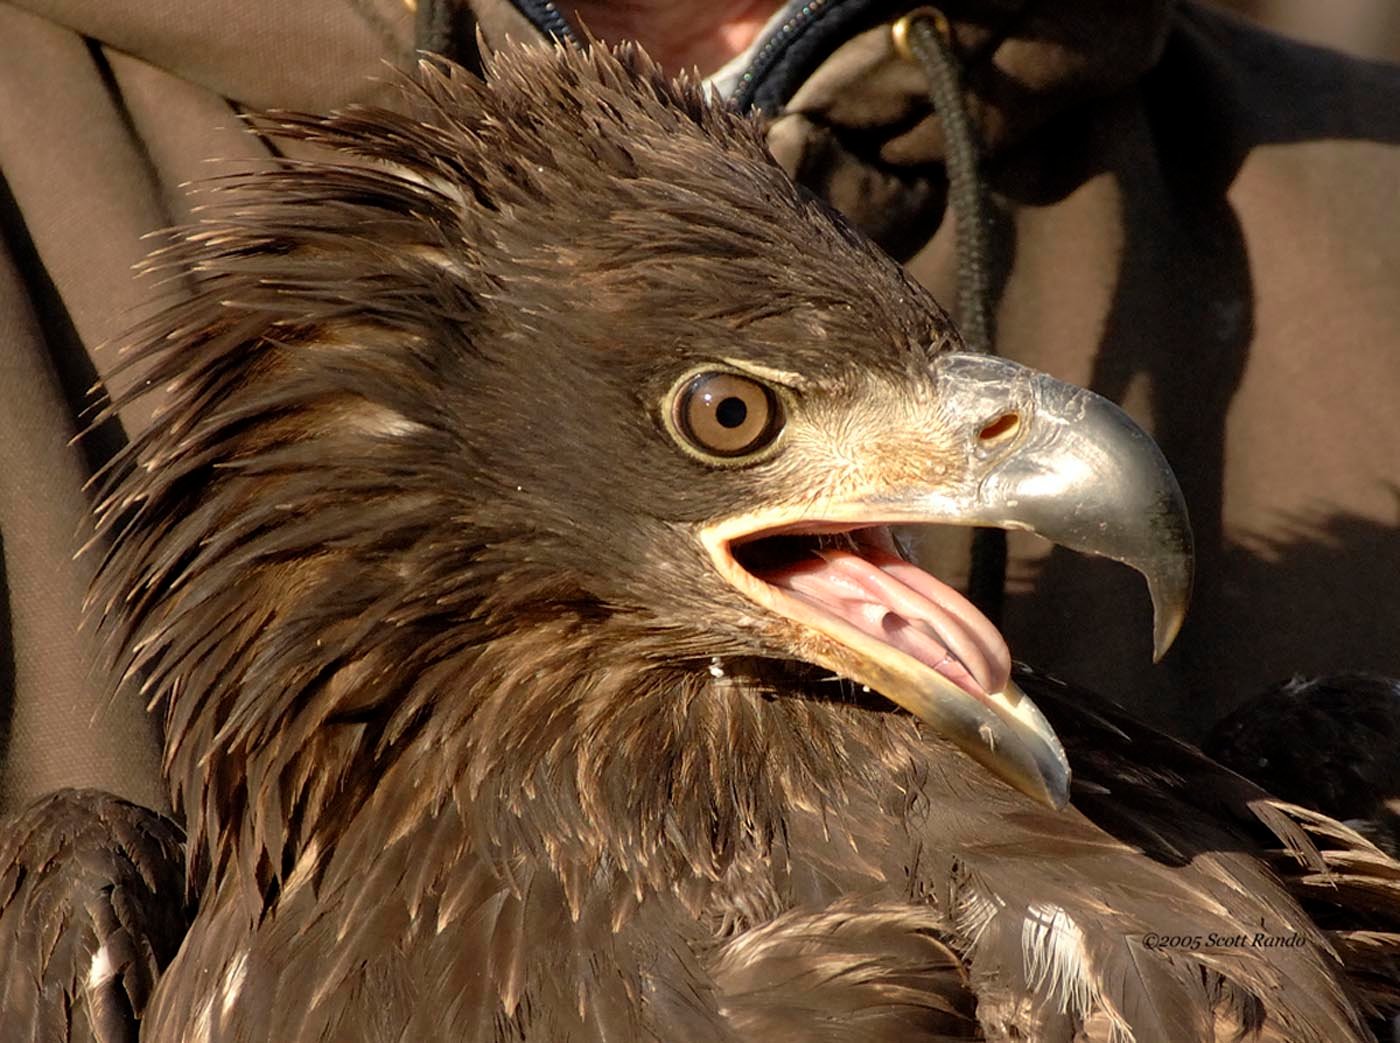 This one-year-old eagle was found on the ground and unable to fly; tests confirmed lead toxicity. After care and treatment by the Delaware Valley Raptor Center, it recovered and was able to be released back into the wild; it is shown here just before being released. This was one of the lucky eagles; many eagles are found that cannot recover from lead toxicity and must be euthanized. Many more affected eagles are never found.